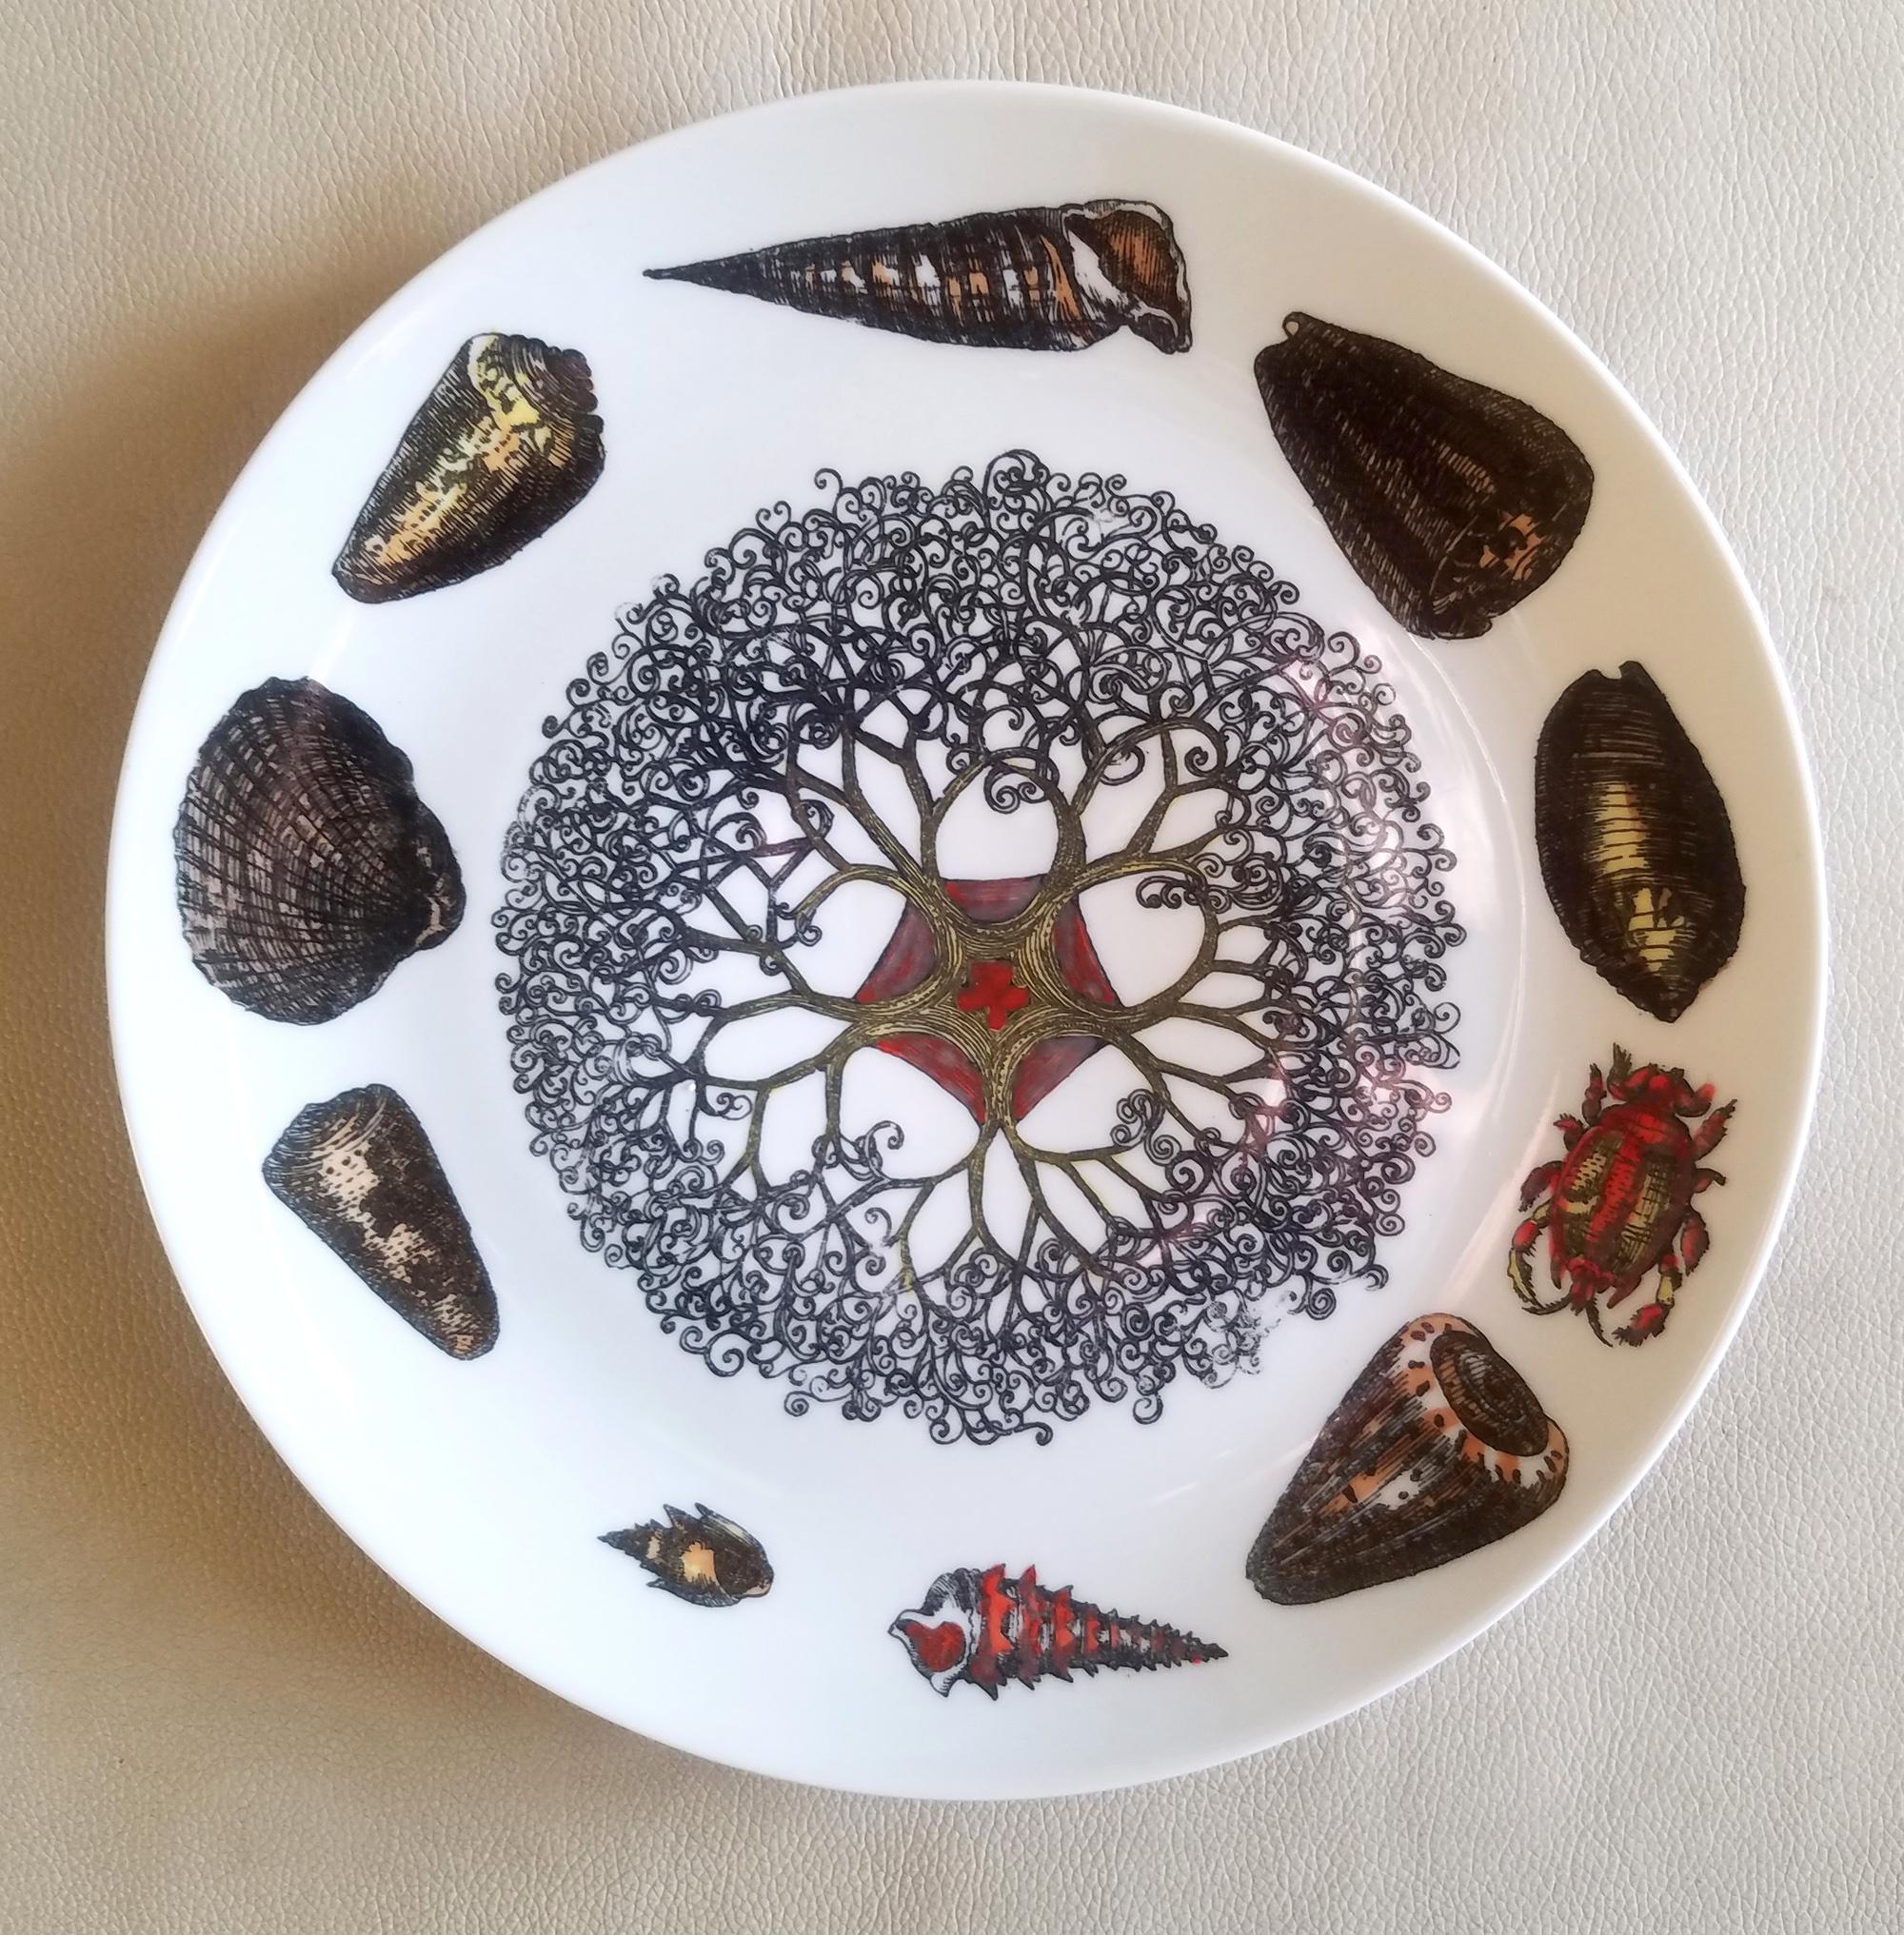 Piero Fornasetti Porcelain Conchiglie Seashell Set of Plates with Mollusks For Sale 9